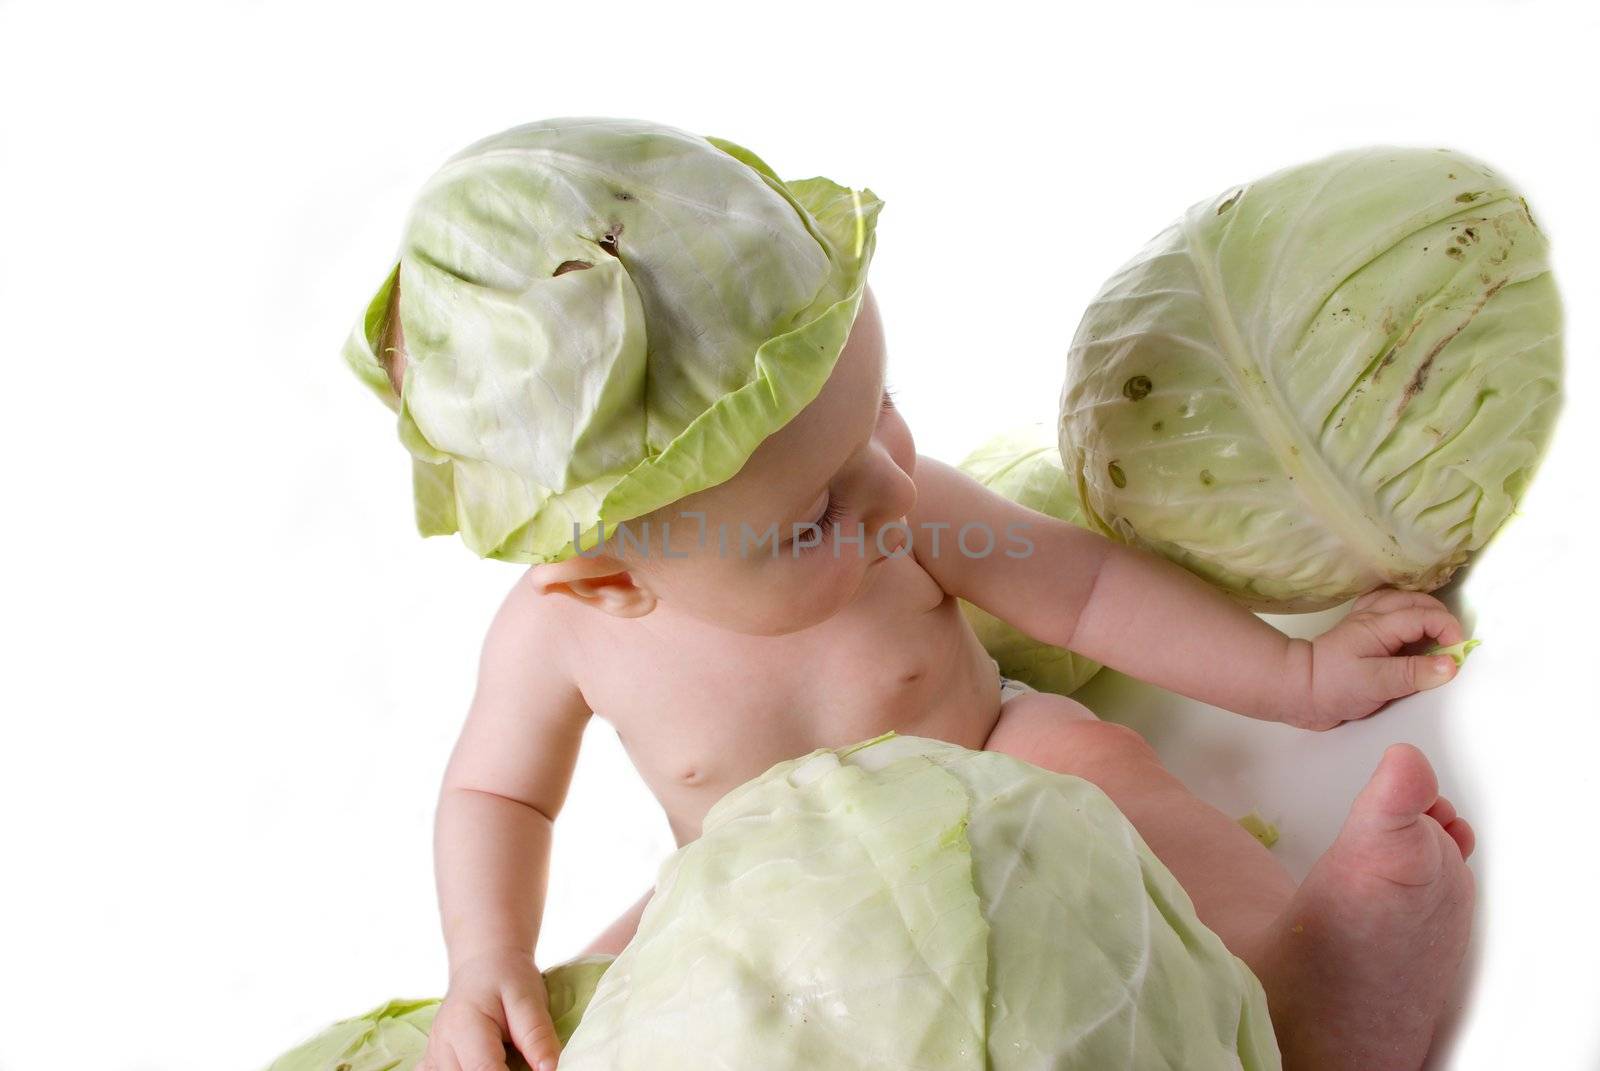 plays of the tot with cabbage by Fanfo